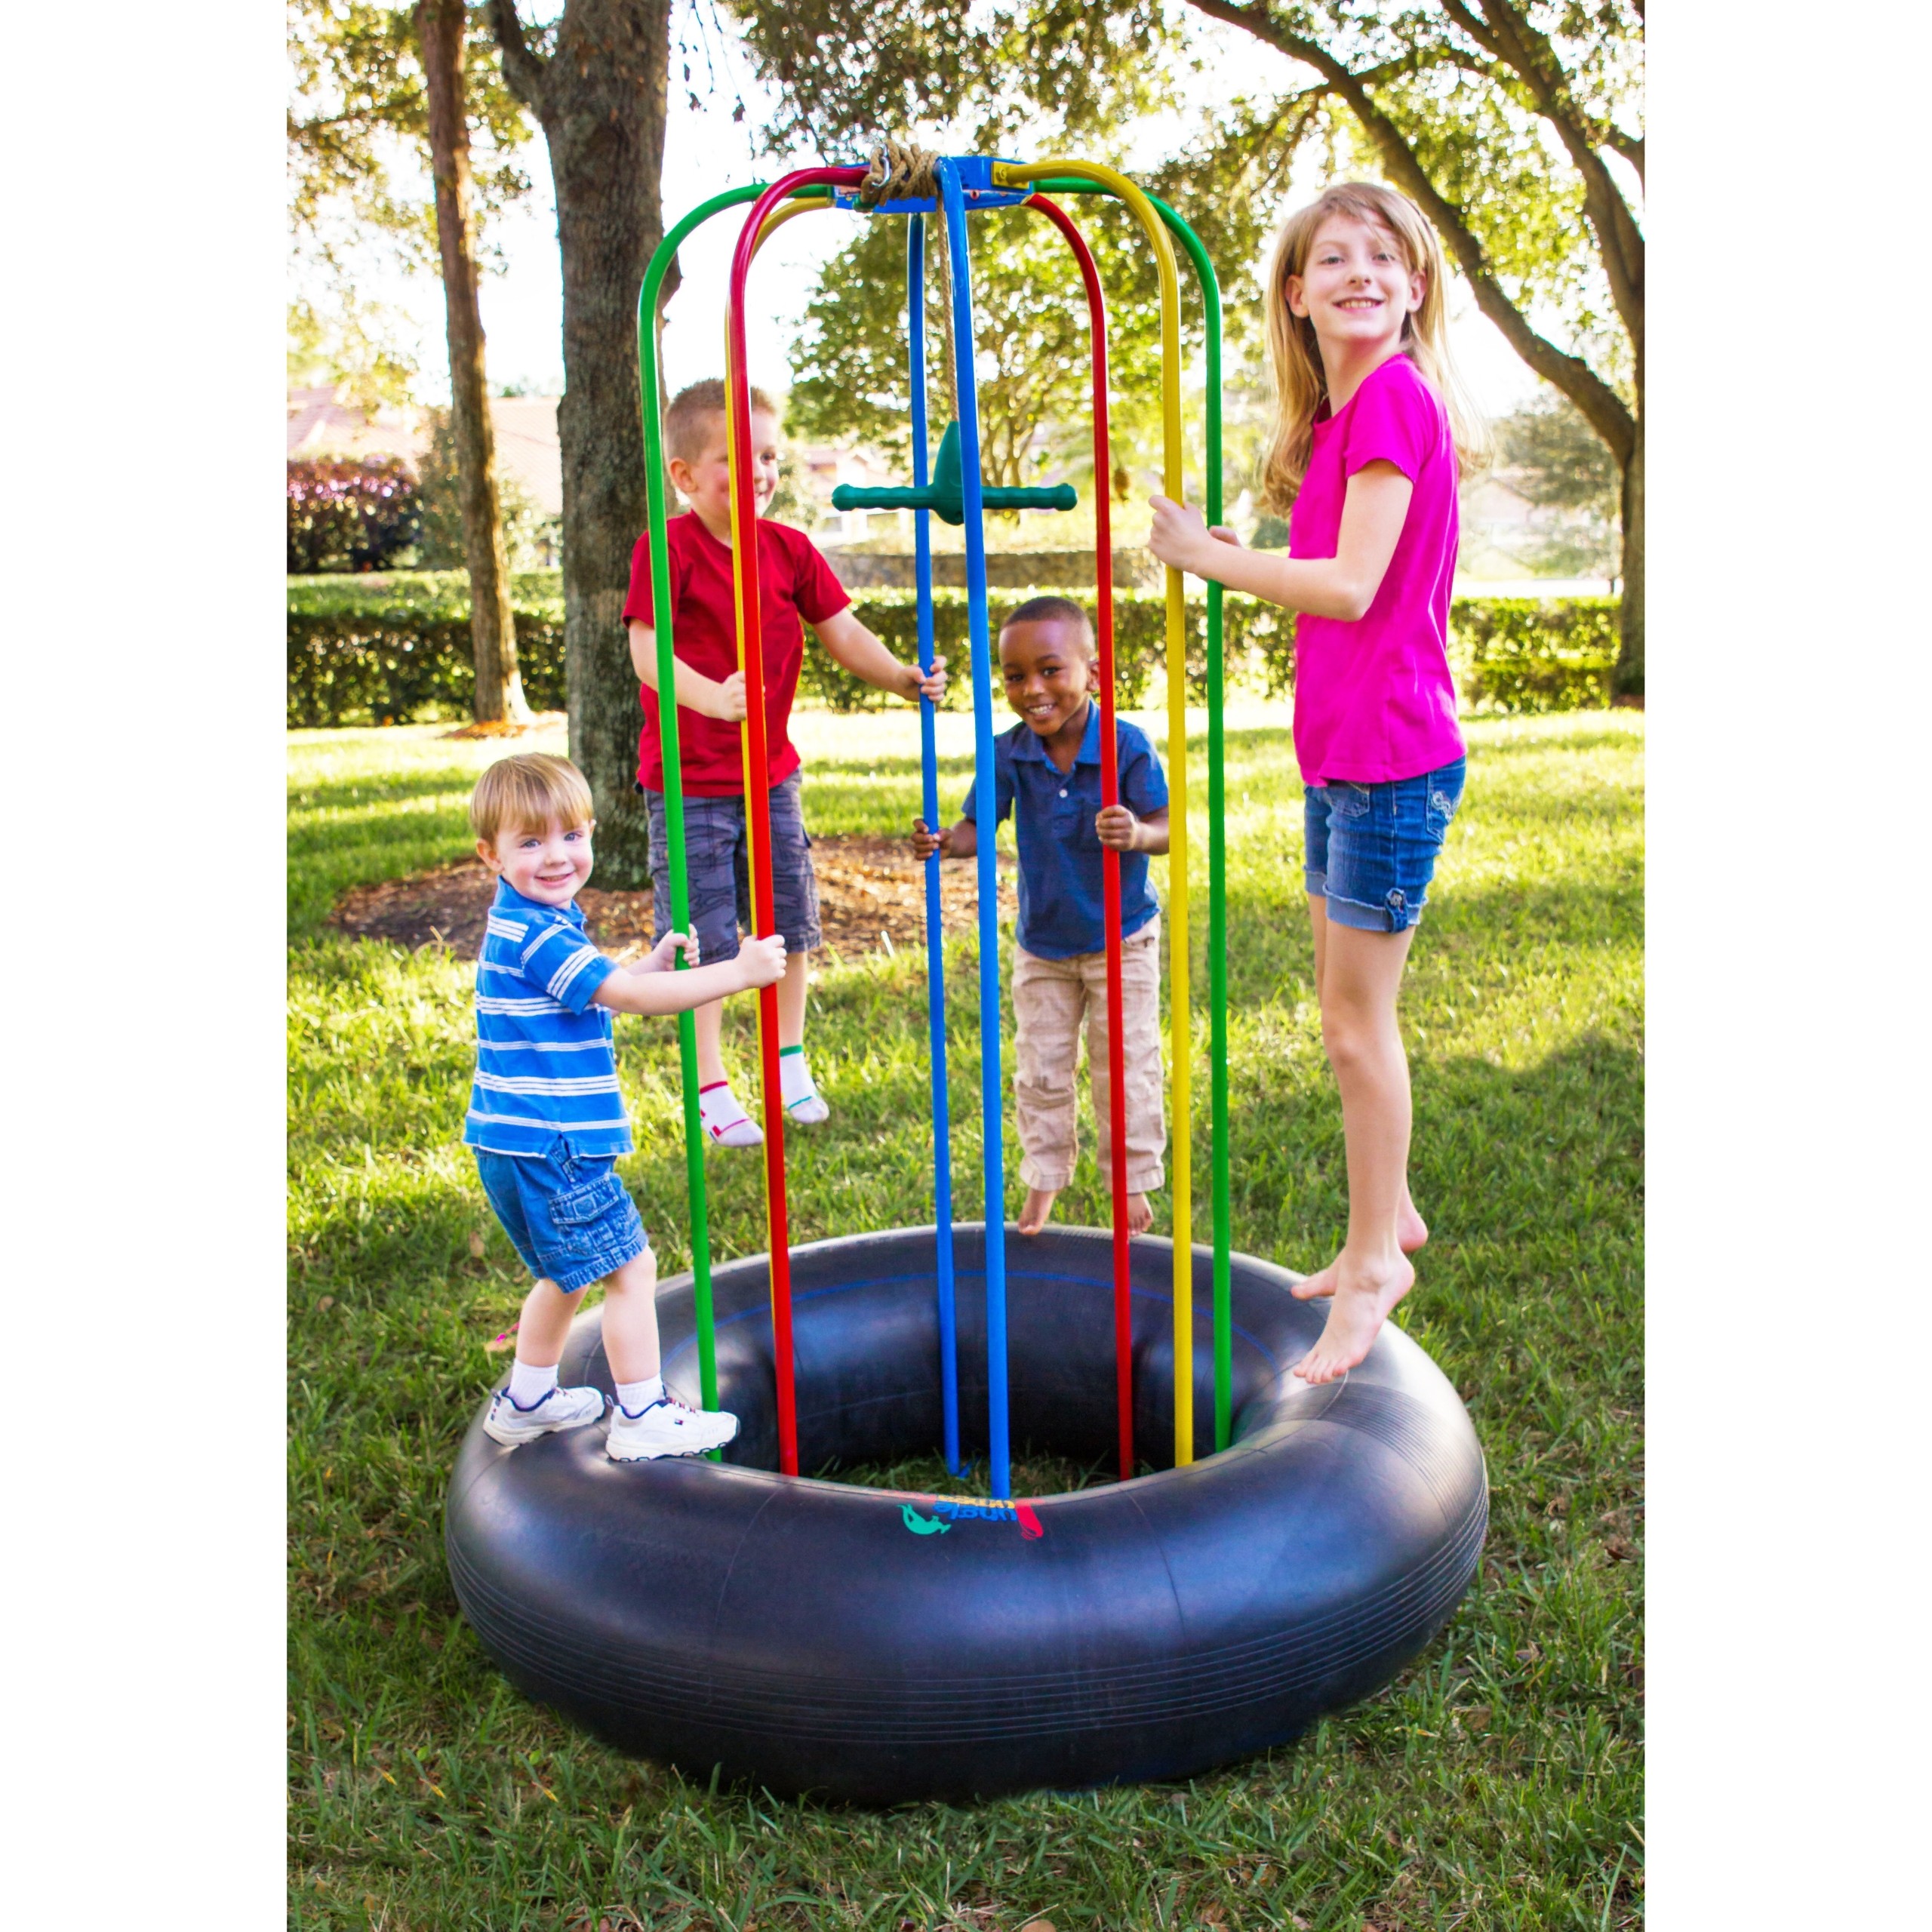 Jungle gyms for kids indoor playground equipment bouncy toys for